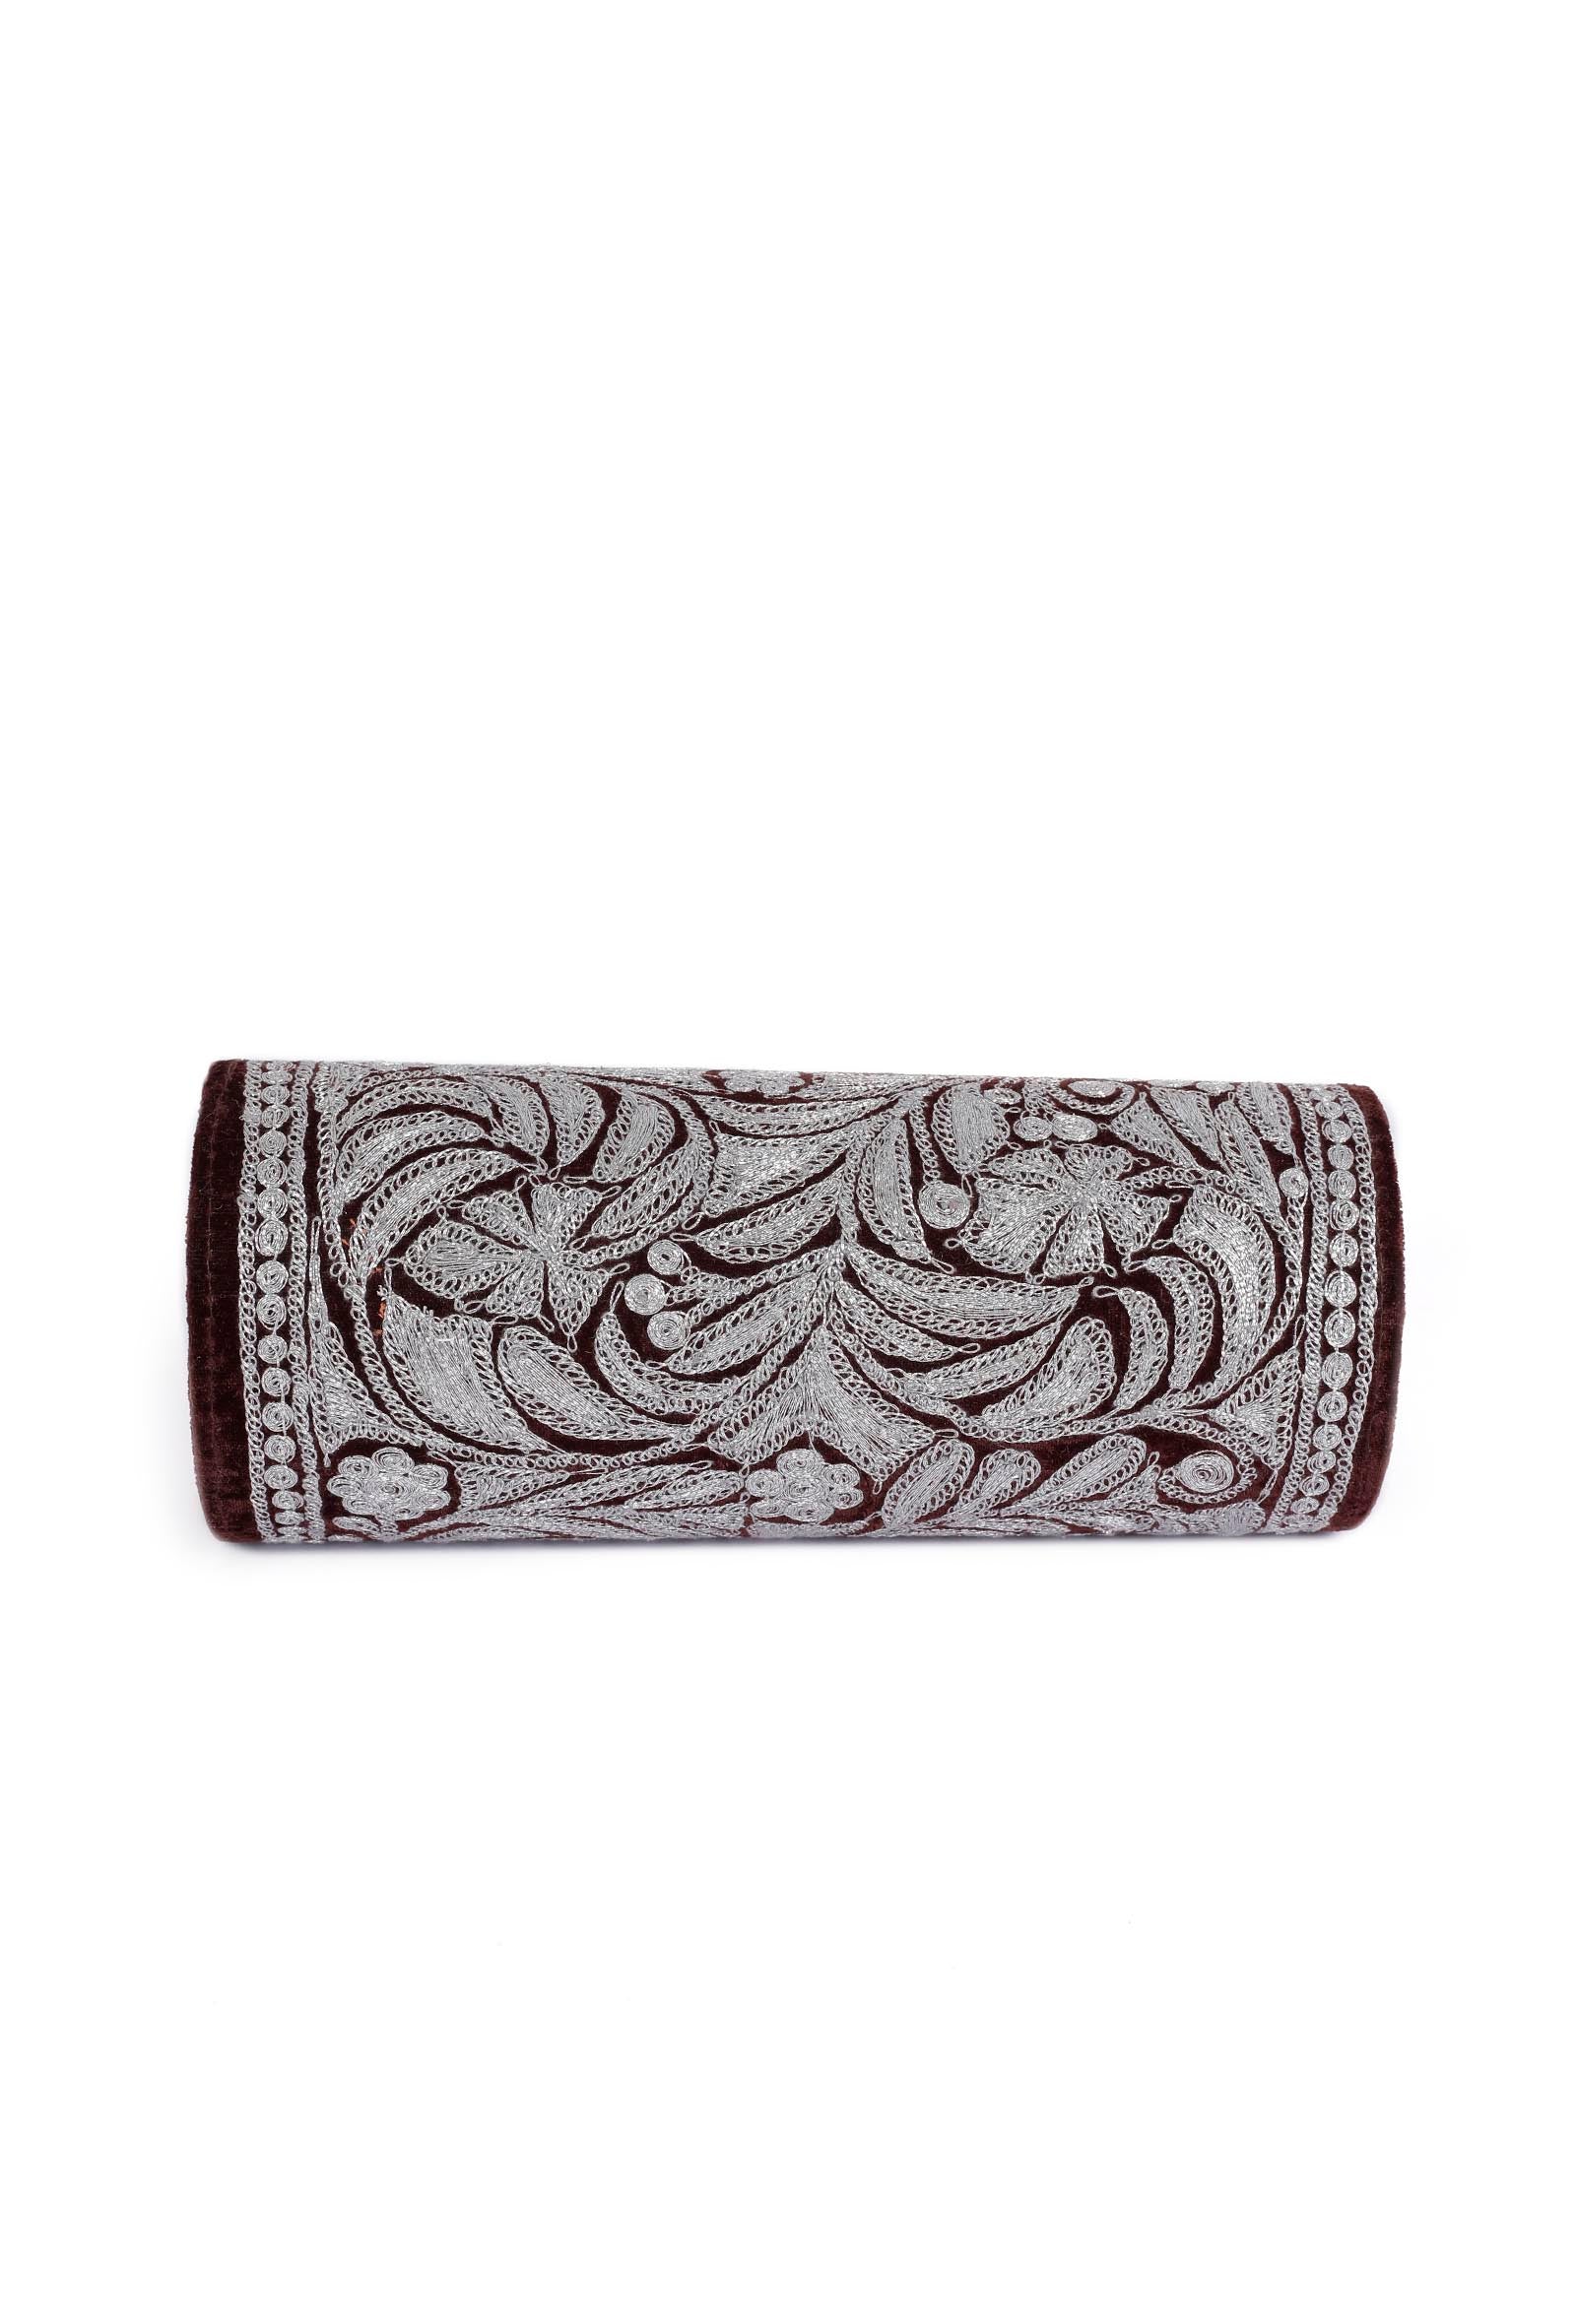 Brown Velvet Silver Embroidered Clutch